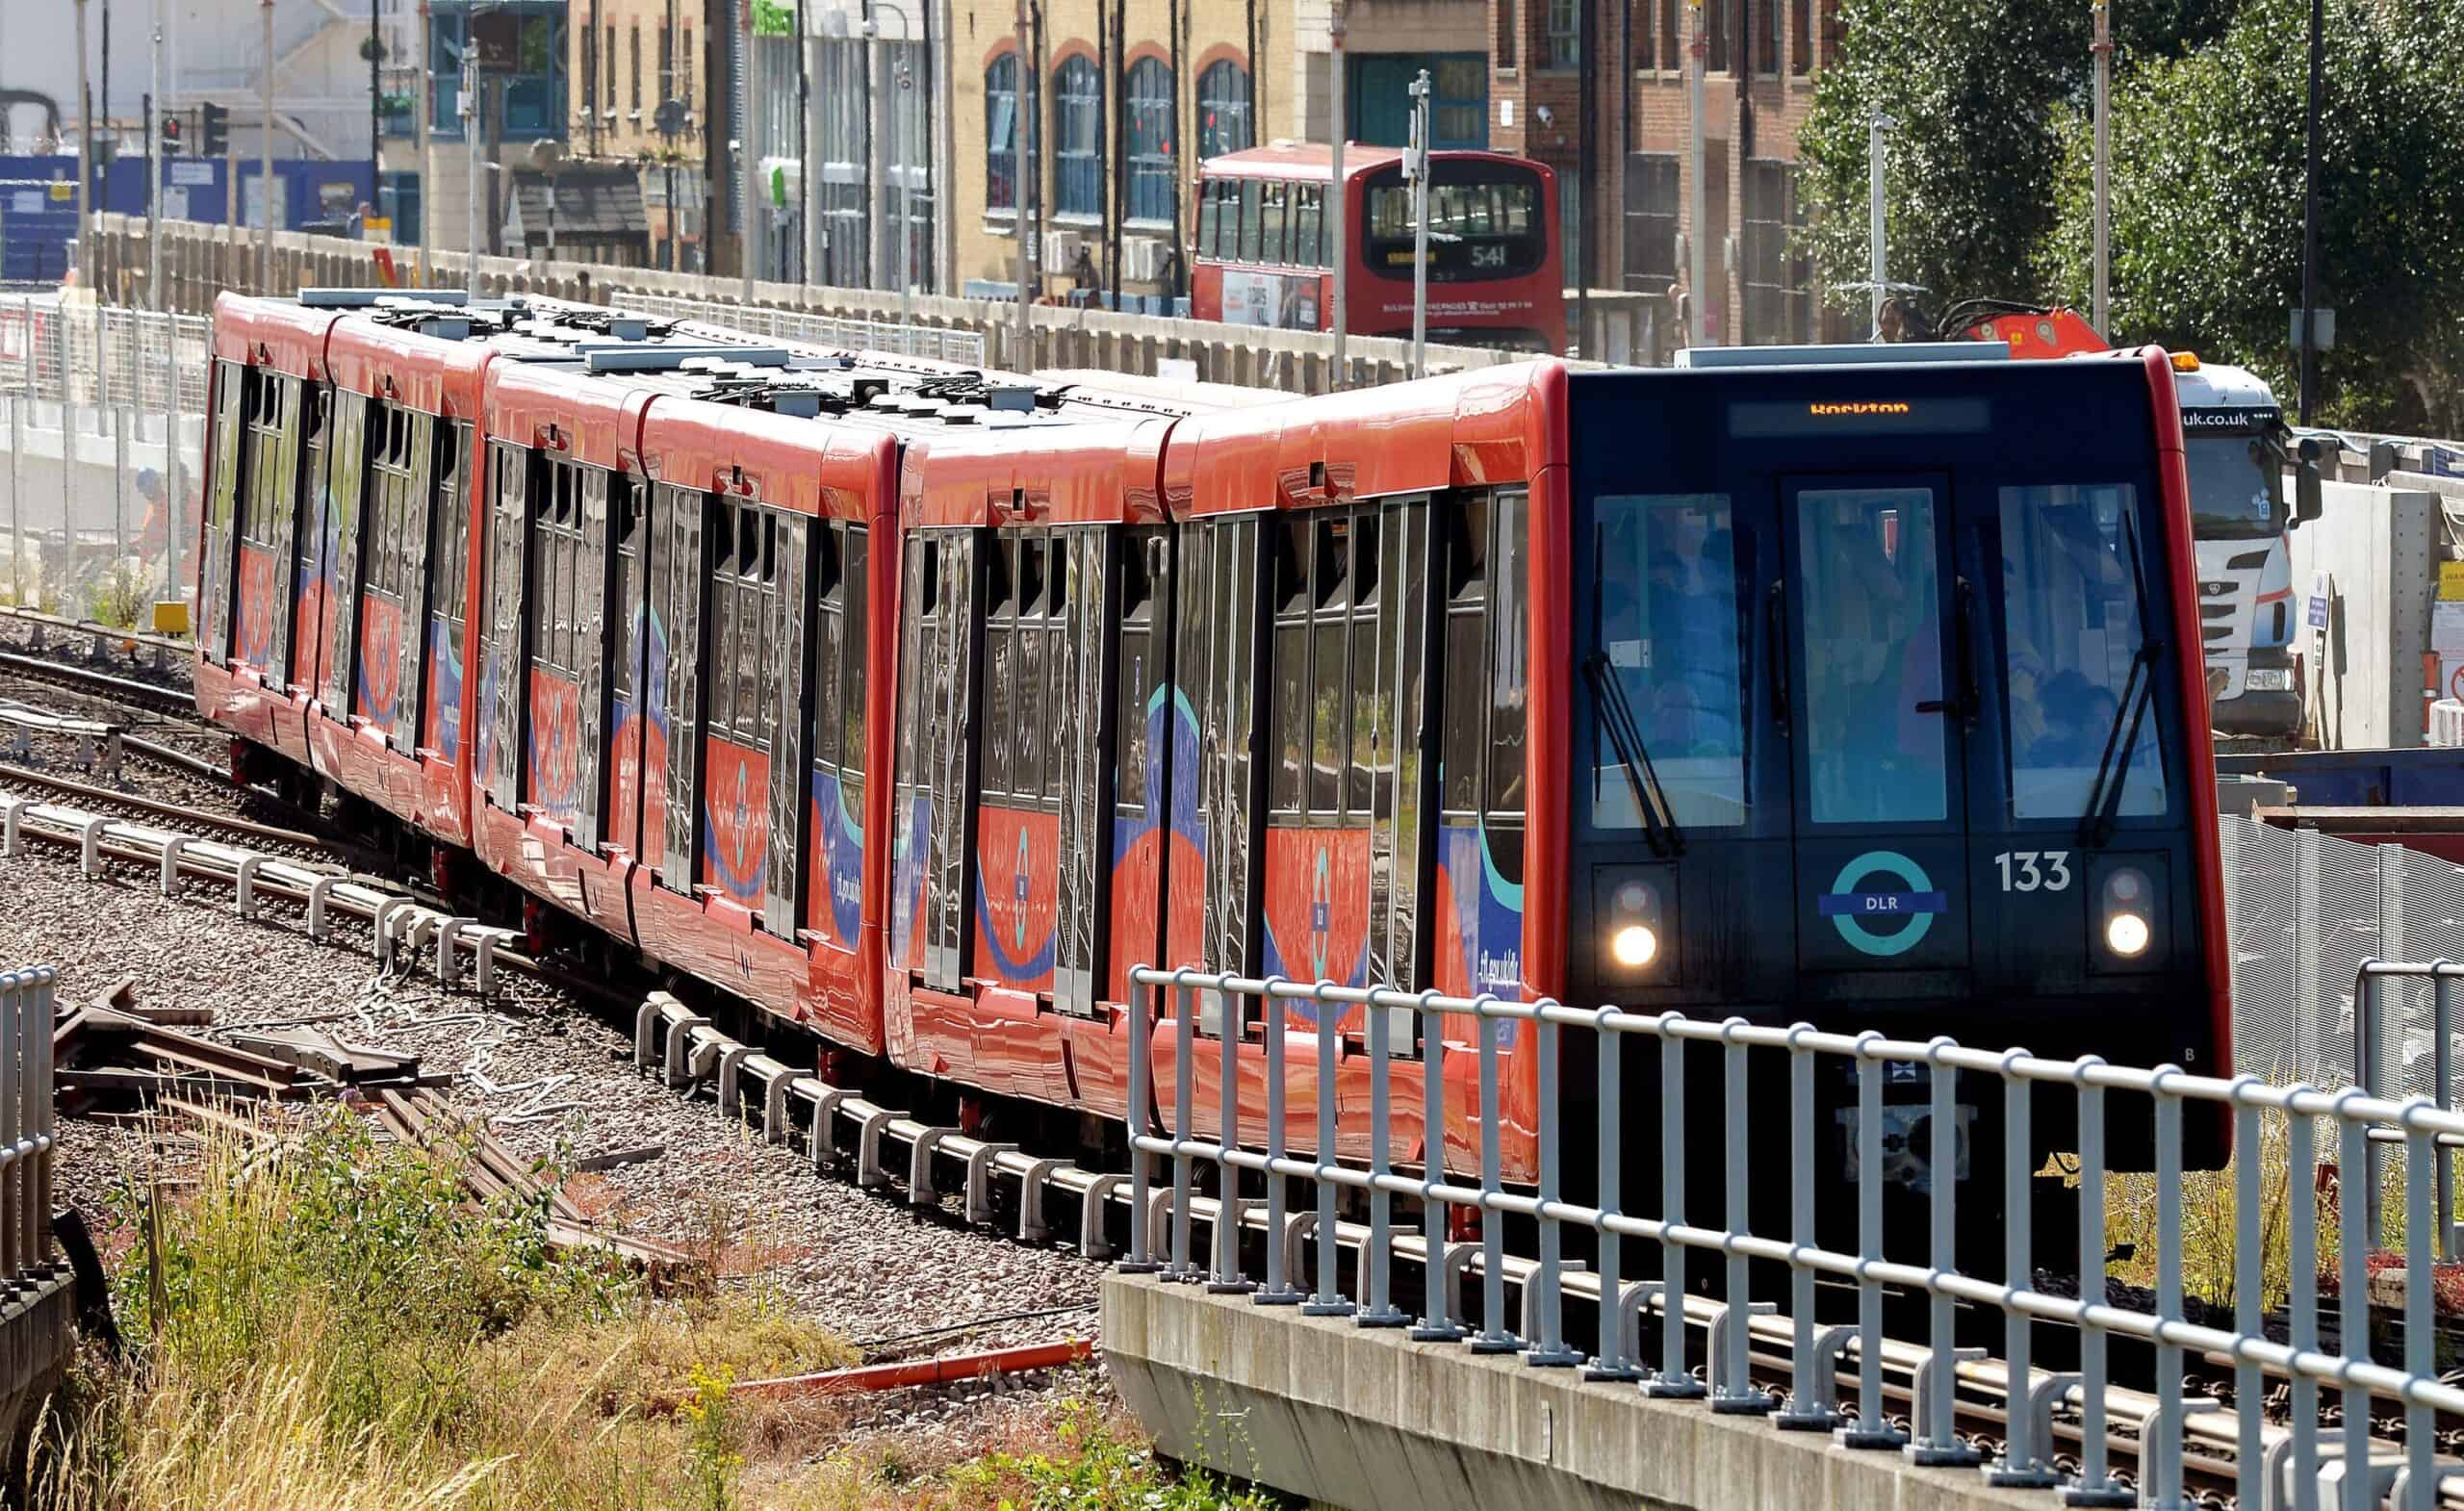 DLR to introduce fake steering wheels to allow kids to ‘drive’ trains